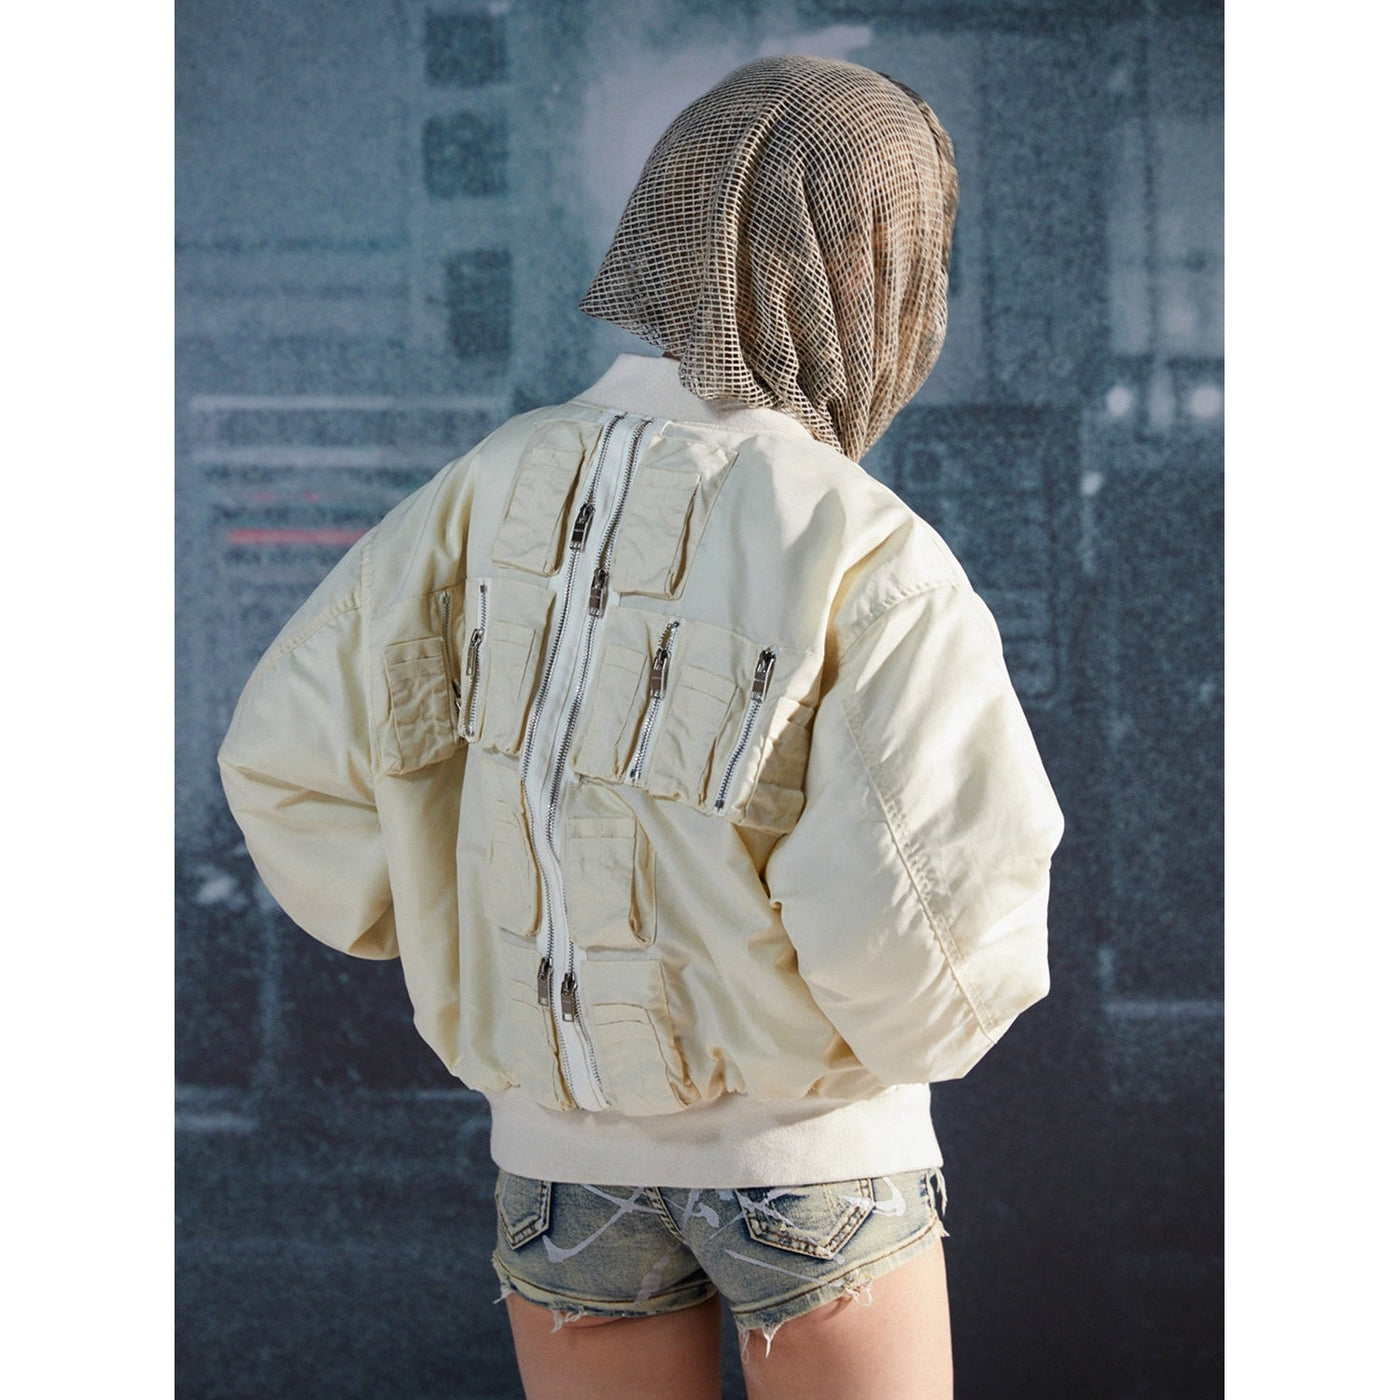 Multiple Zippers Bomber Jacket Korean Street Fashion Jacket By R69 Shop Online at OH Vault